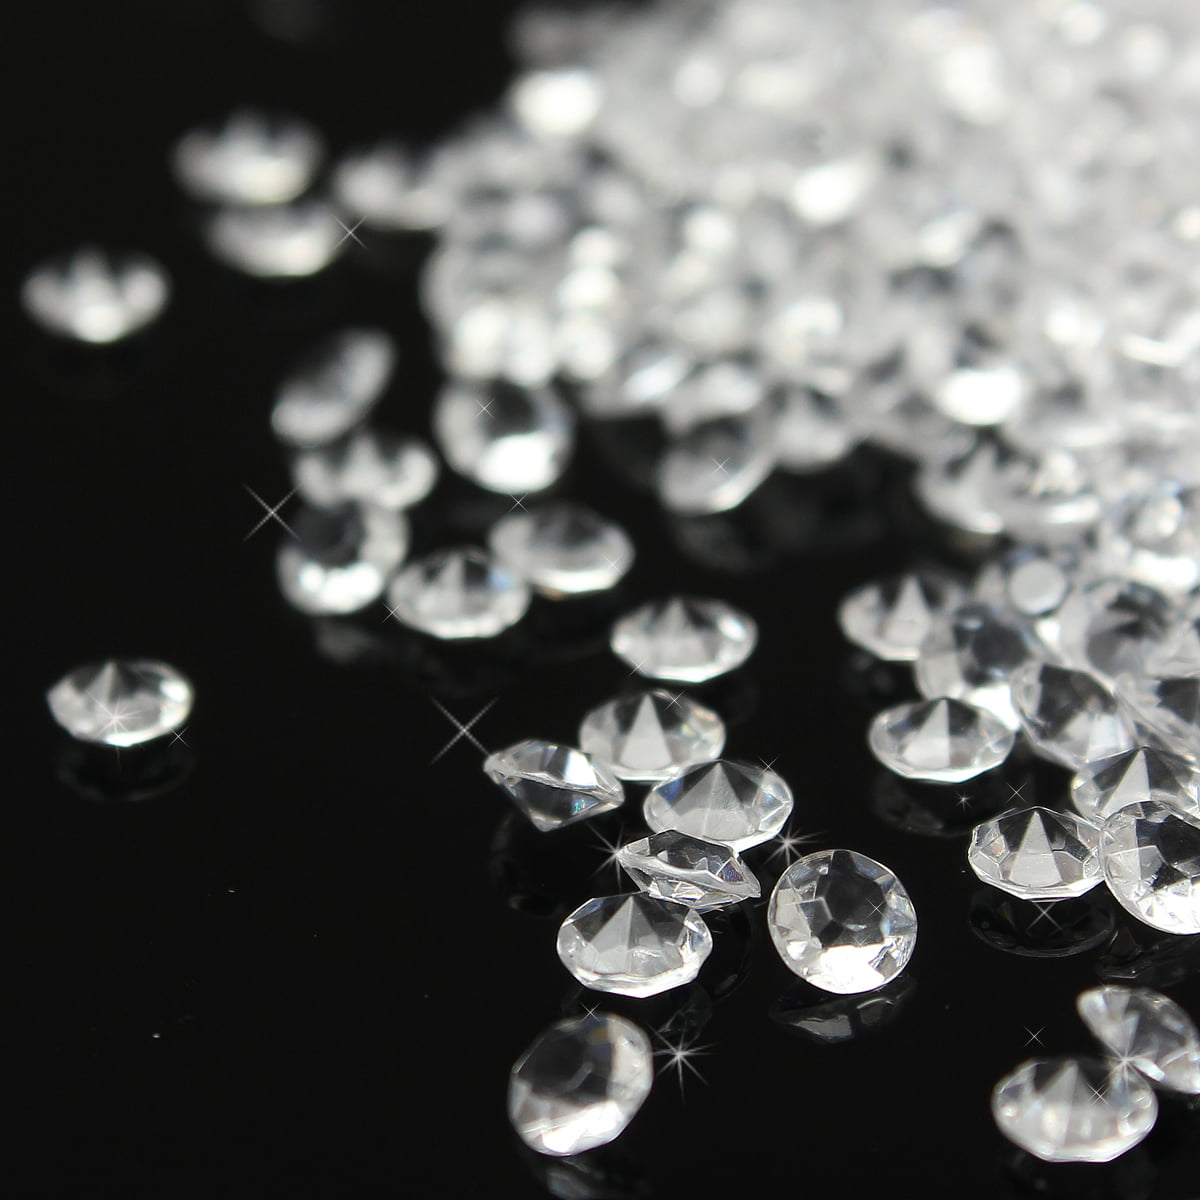 2000 Clear Acrylic Diamond Confetti 4.5mm for Wedding Decoration Table Scatters 